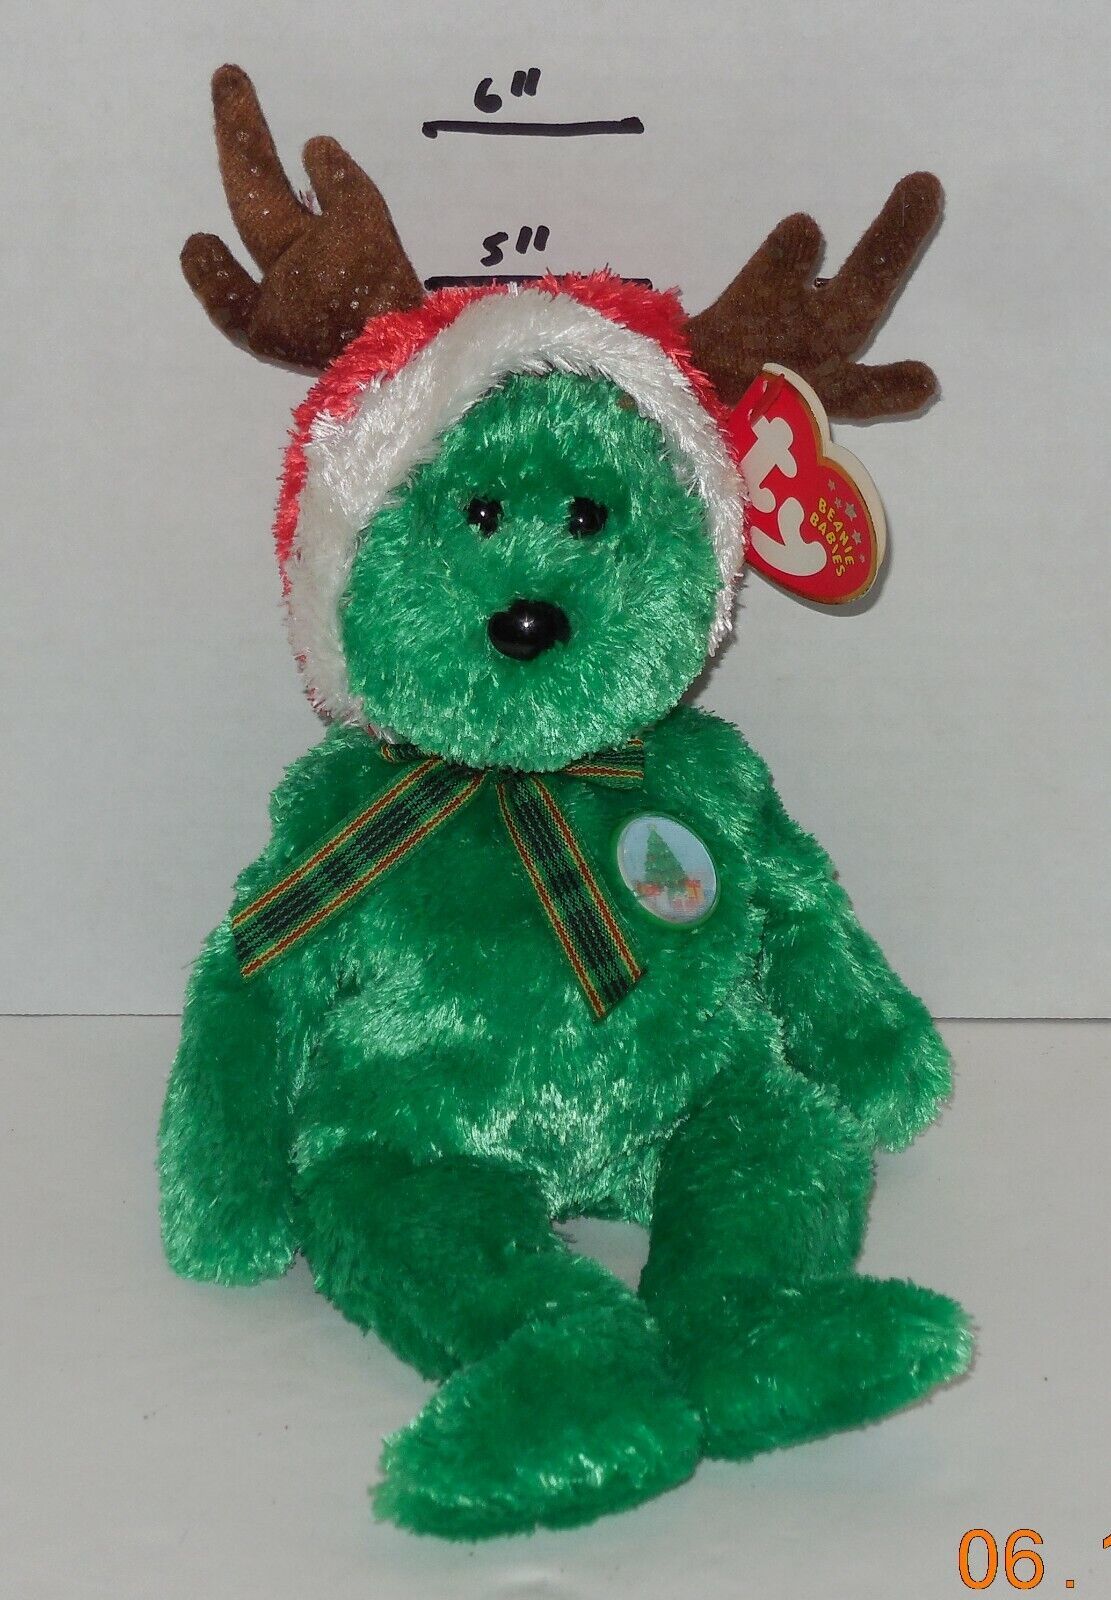 Primary image for Ty 2002 Holiday BEAR Beanie Baby plush toy